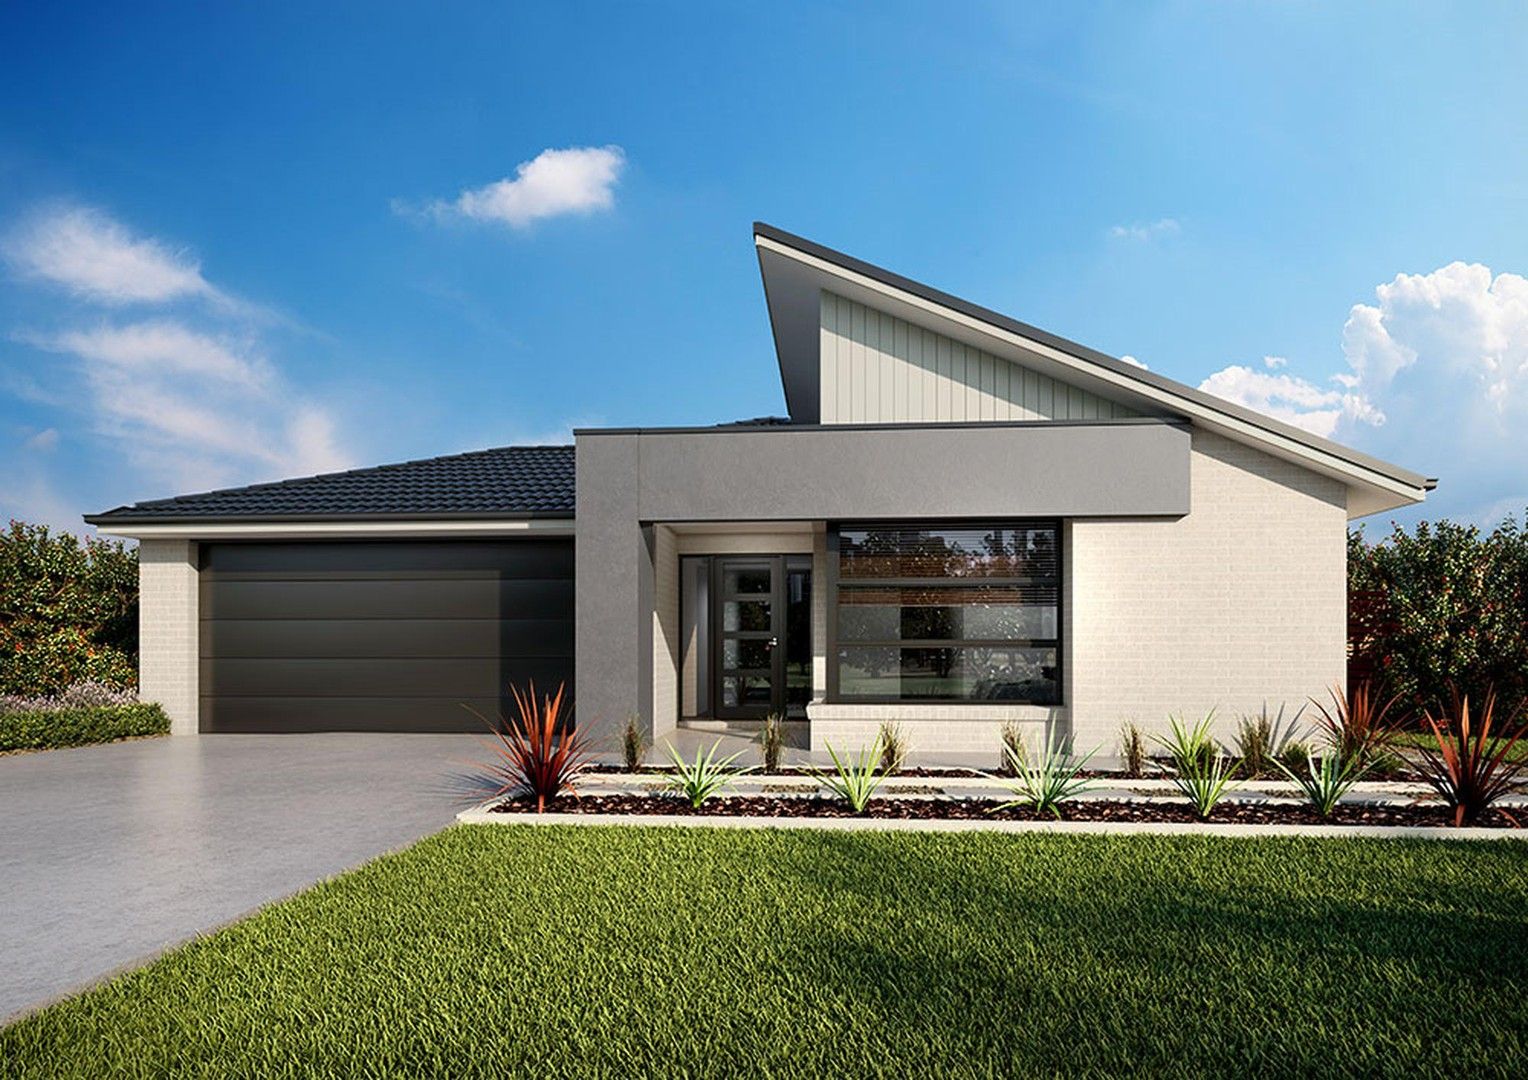 4 bedrooms New House & Land in 431 Banksia Estate ARMSTRONG CREEK VIC, 3217